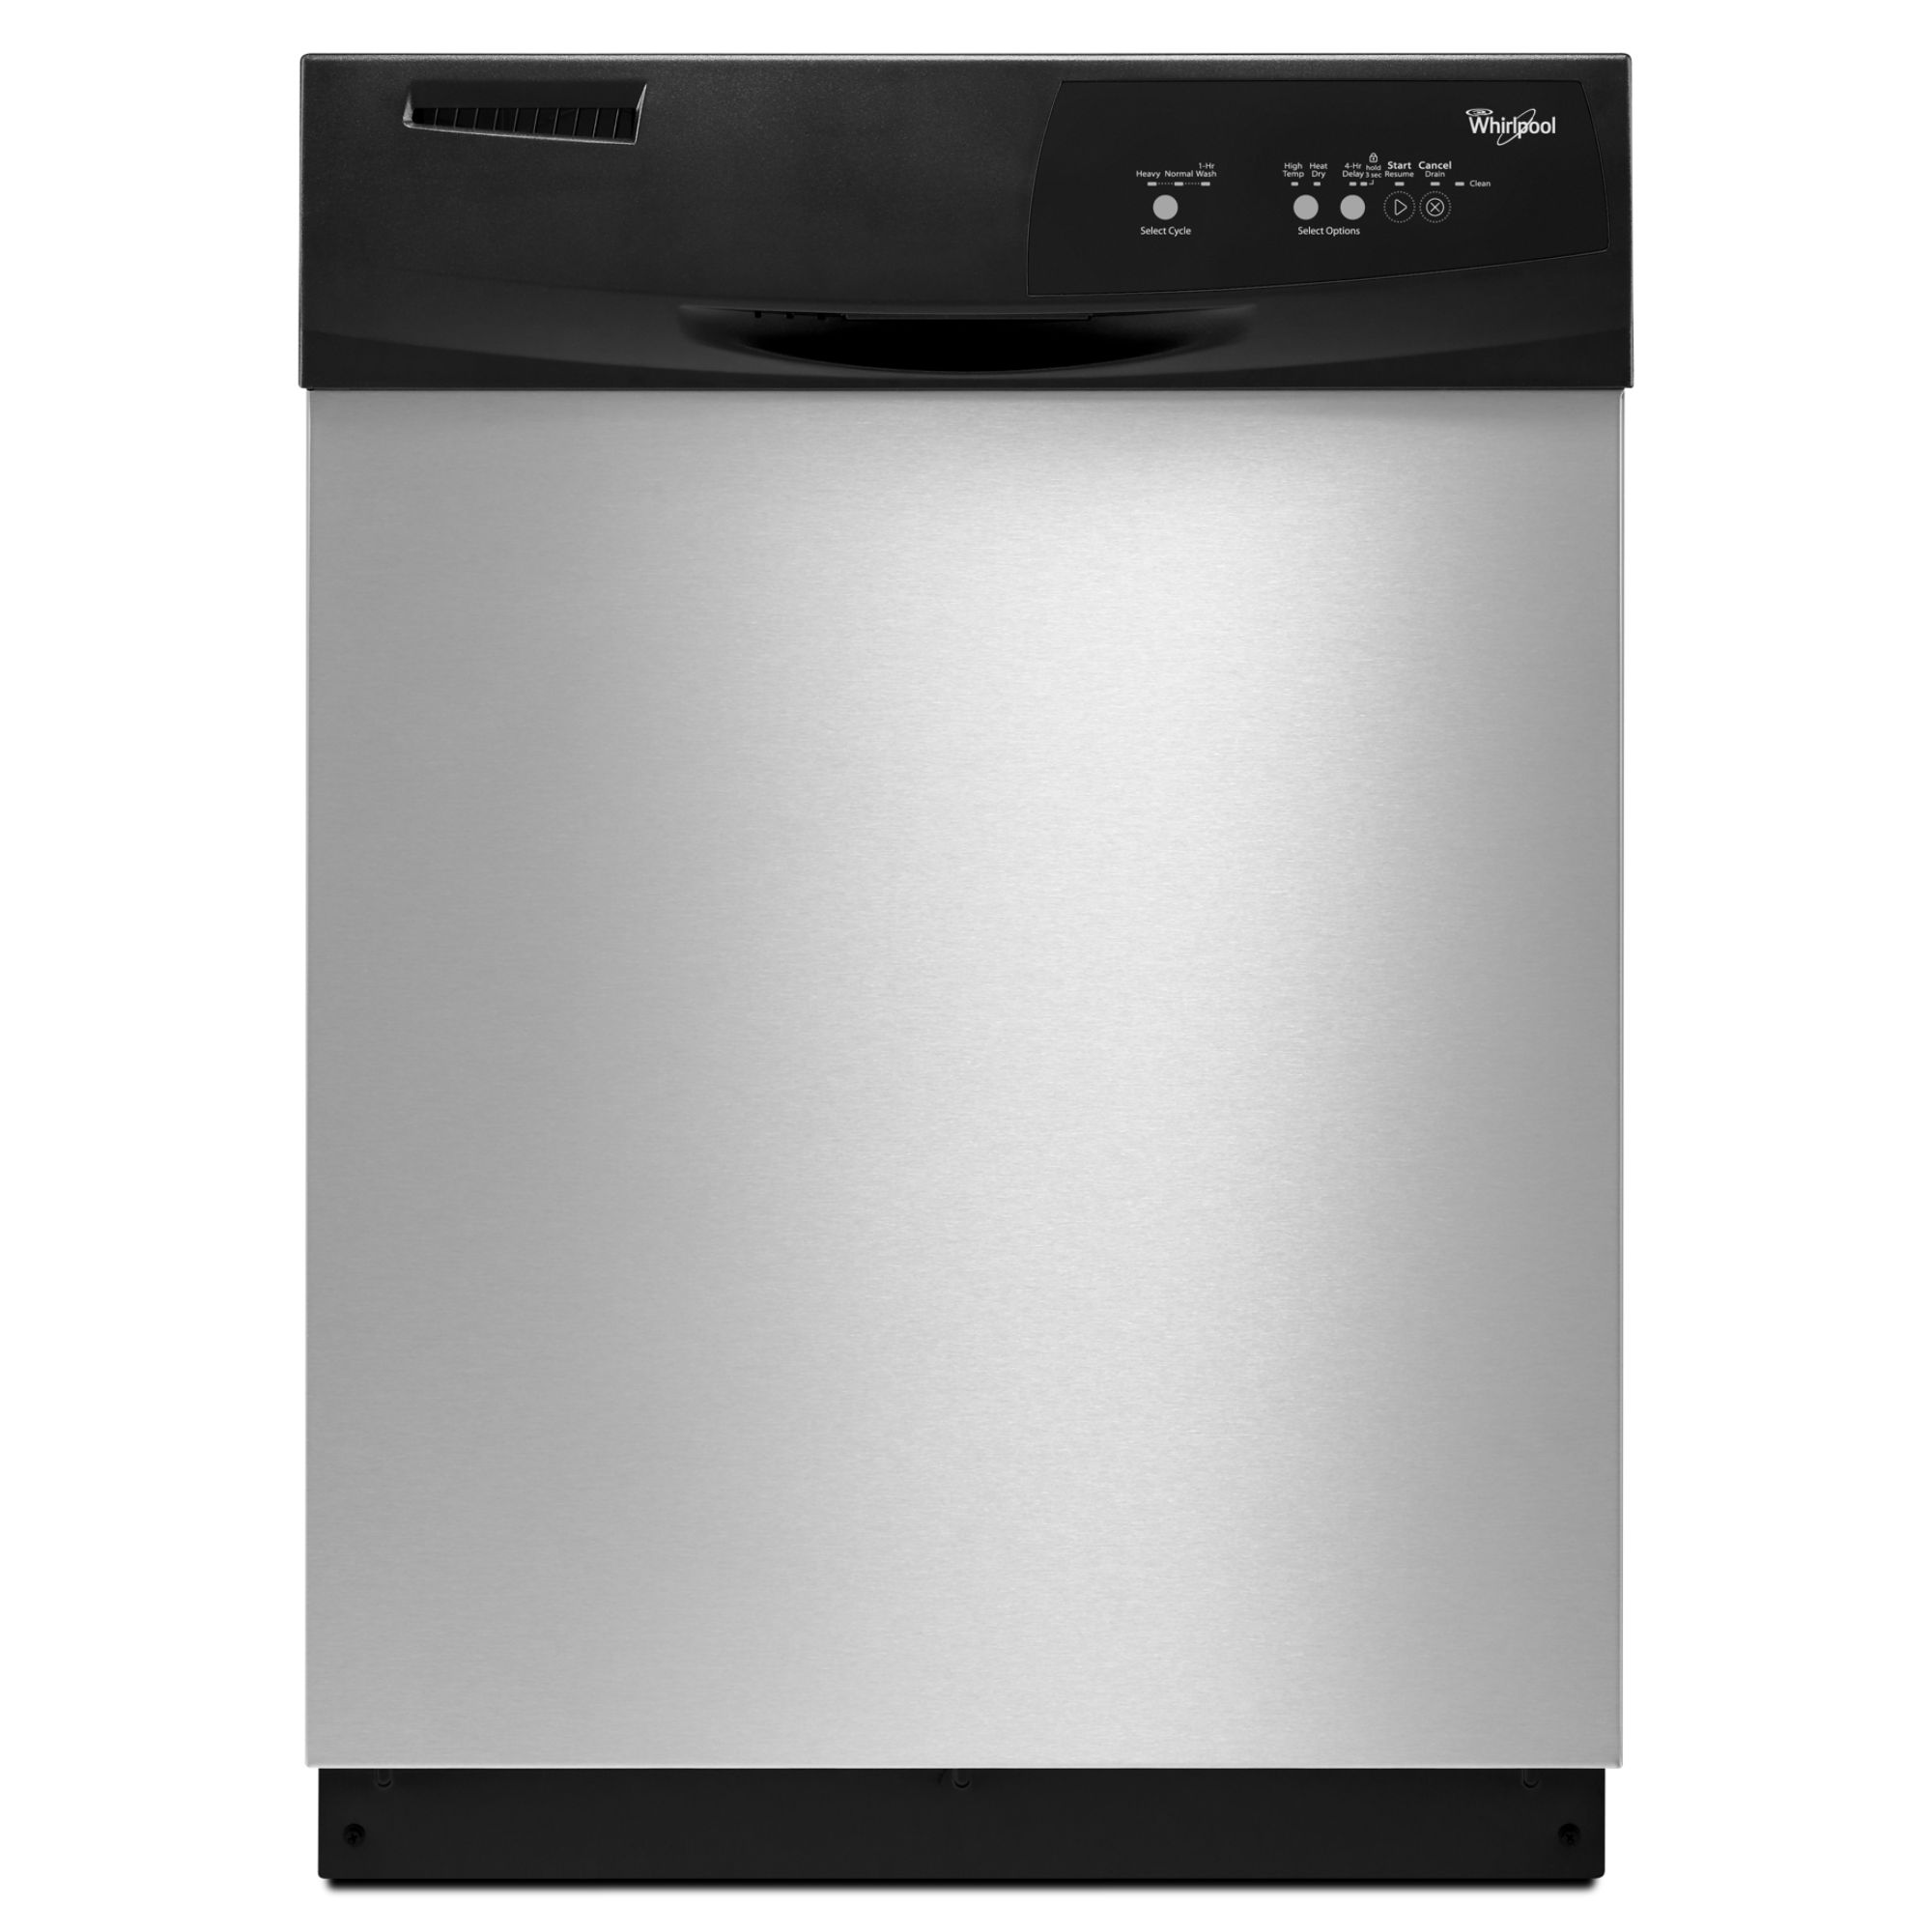 Whirlpool Universal Silver Built-In Dishwasher - WDF310PAAD